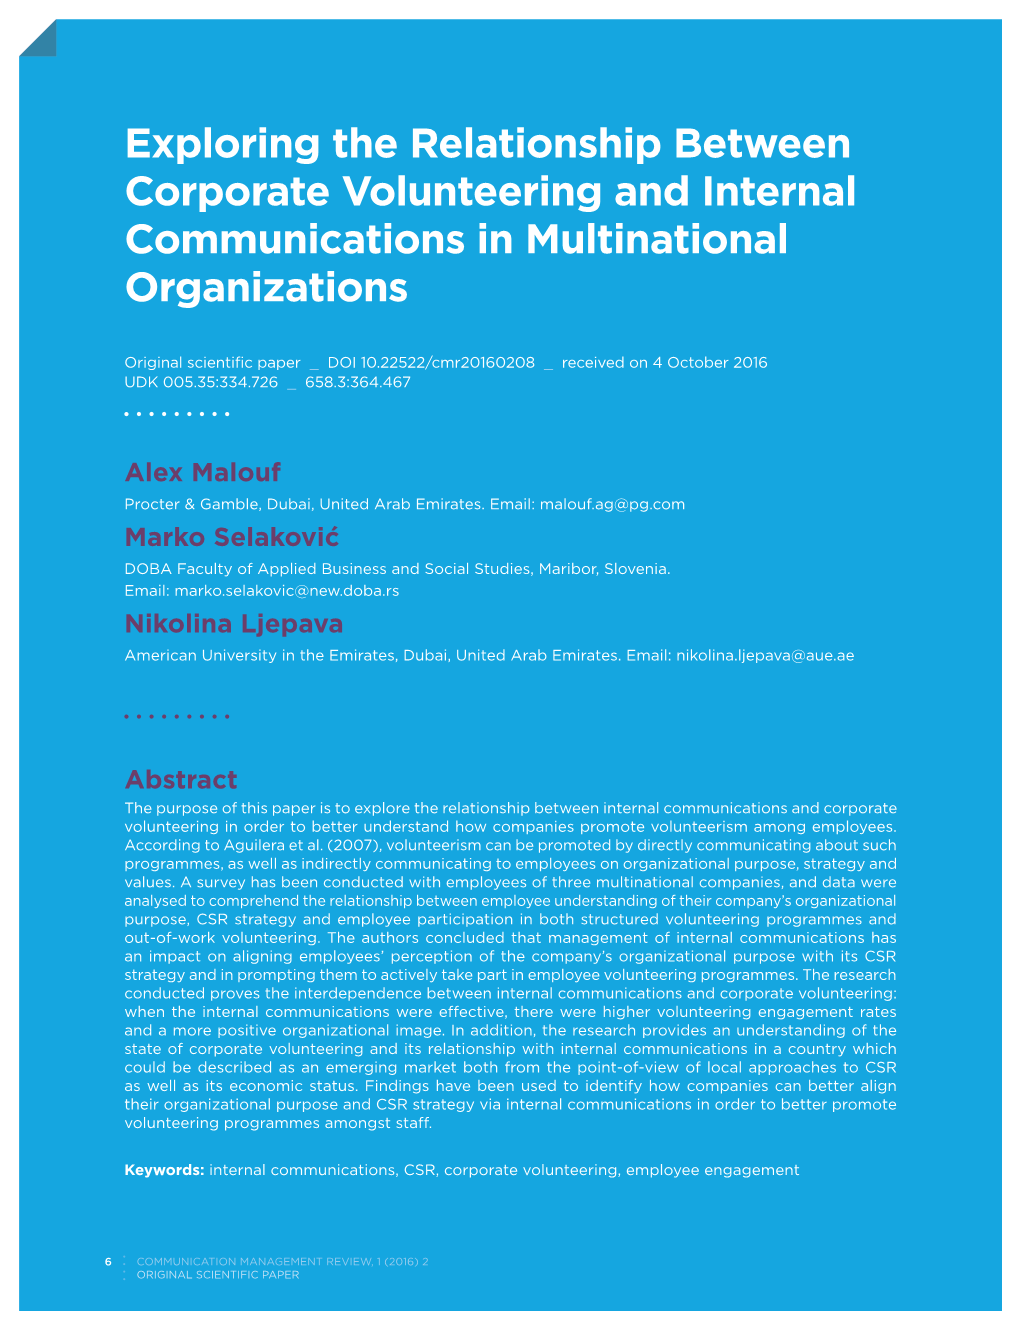 Exploring the Relationship Between Corporate Volunteering and Internal Communications in Multinational Organizations